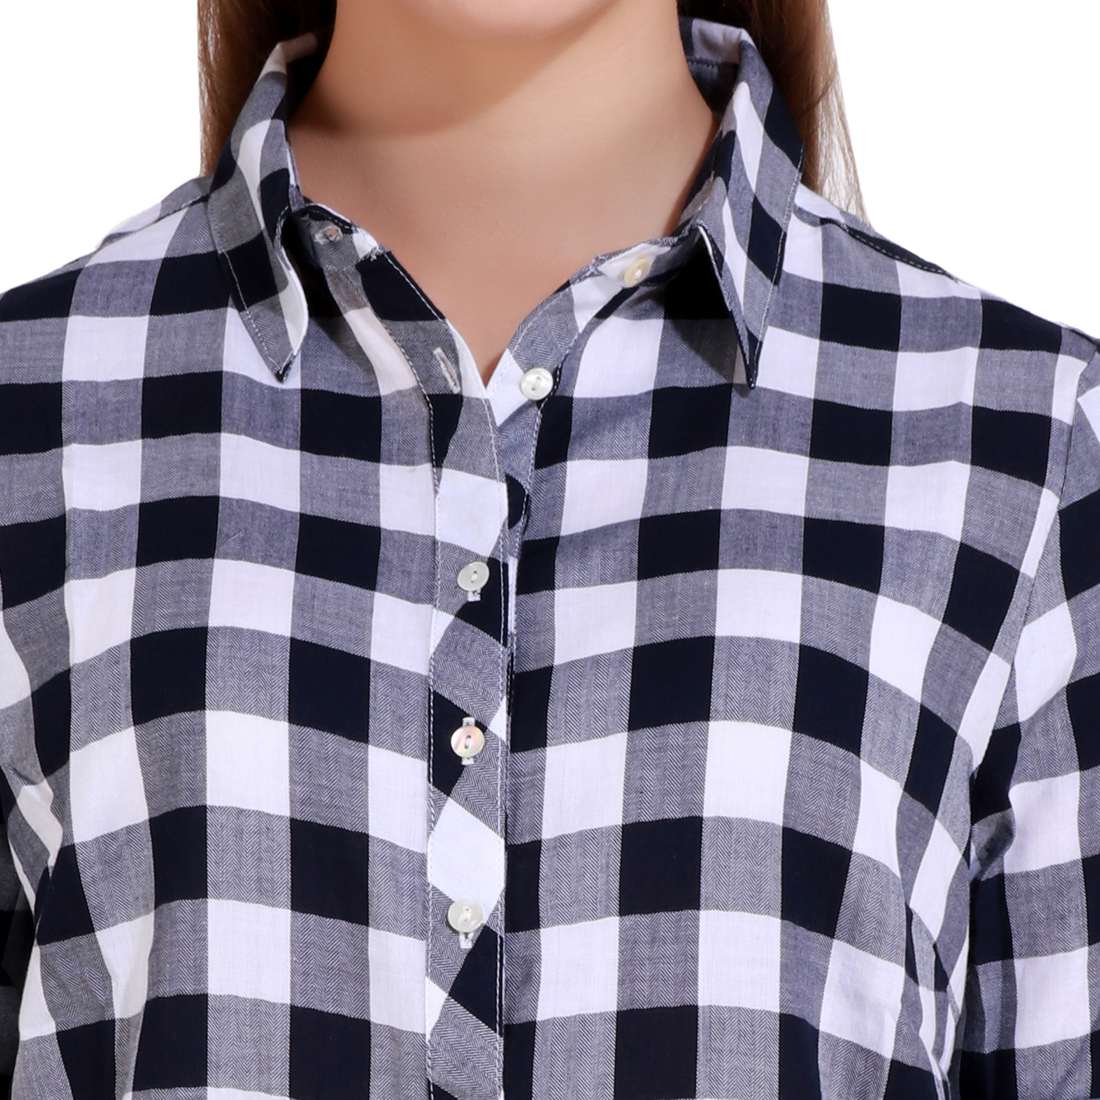 Buy cotton check long shirt Online @ ₹599 from ShopClues